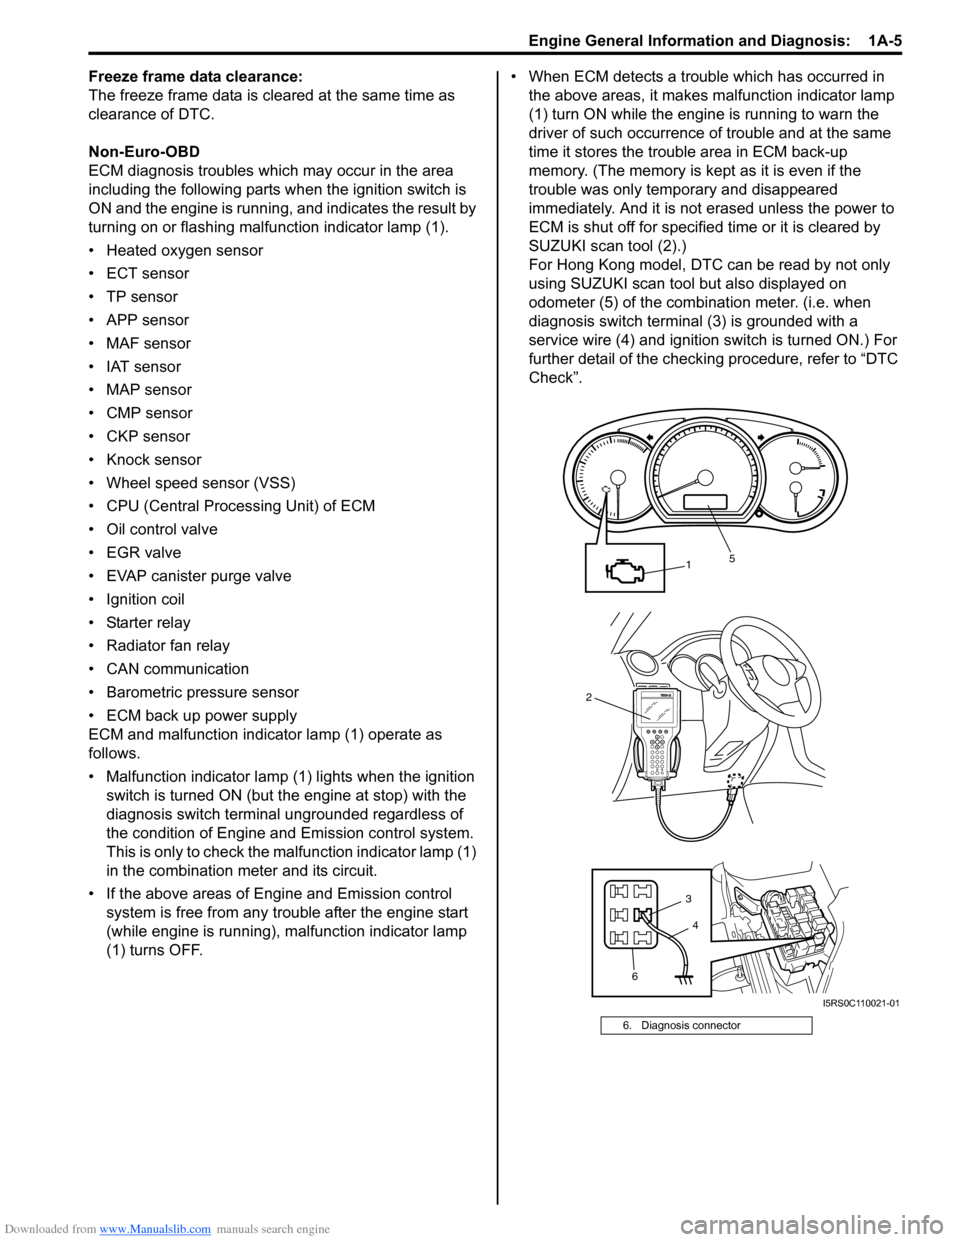 SUZUKI SWIFT 2005 2.G Service Repair Manual Downloaded from www.Manualslib.com manuals search engine Engine General Information and Diagnosis:  1A-5
Freeze frame data clearance:
The freeze frame data is cleared at the same time as 
clearance of